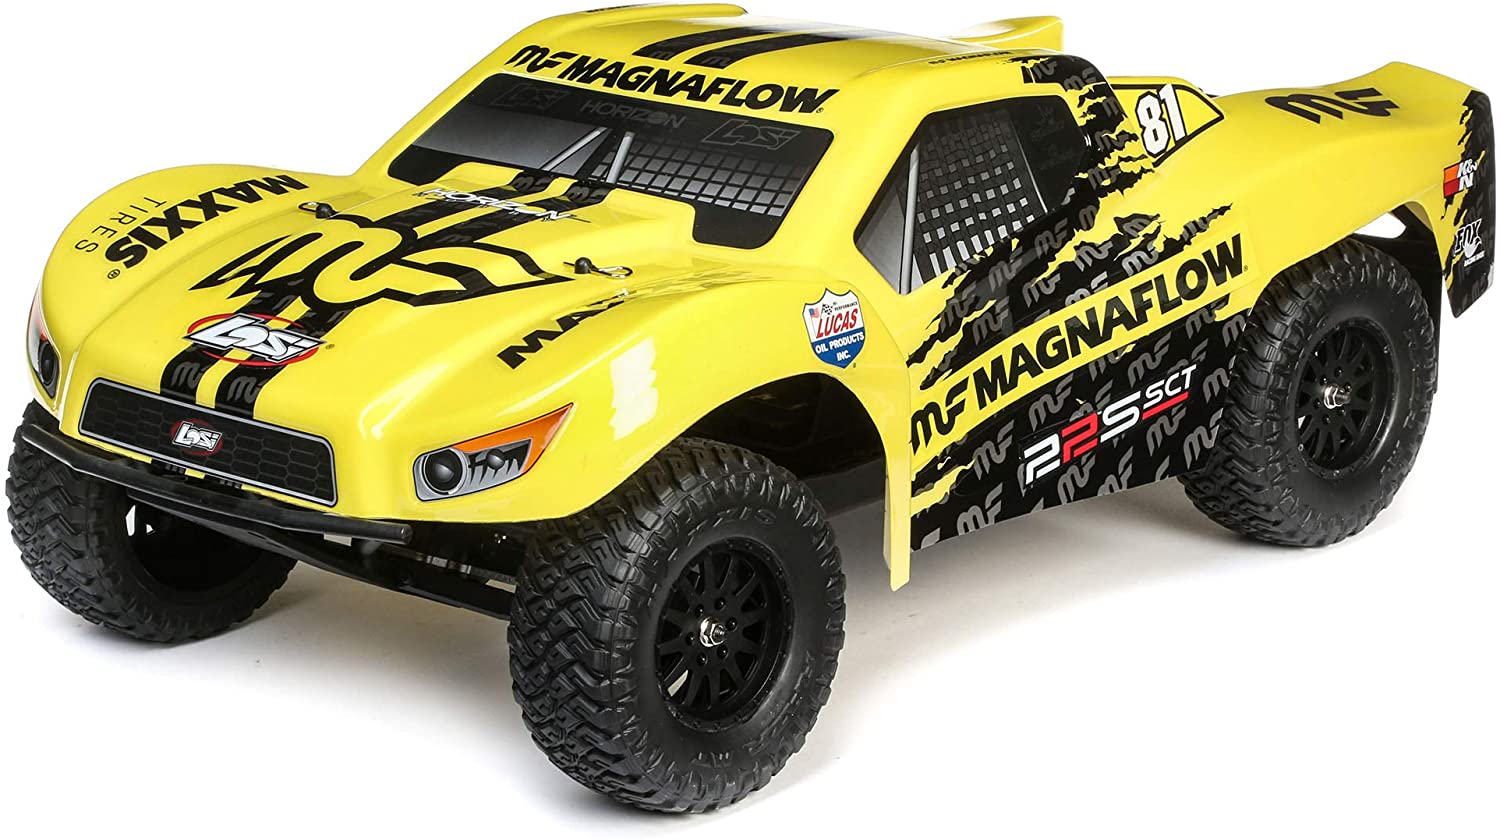 Amazon Offer: Losi RC Truck 1/10 22S 2WD SCT Brushed RTR (Ready-to- Run), MagnaFlow, LOS03022T1,Yellow $189.99